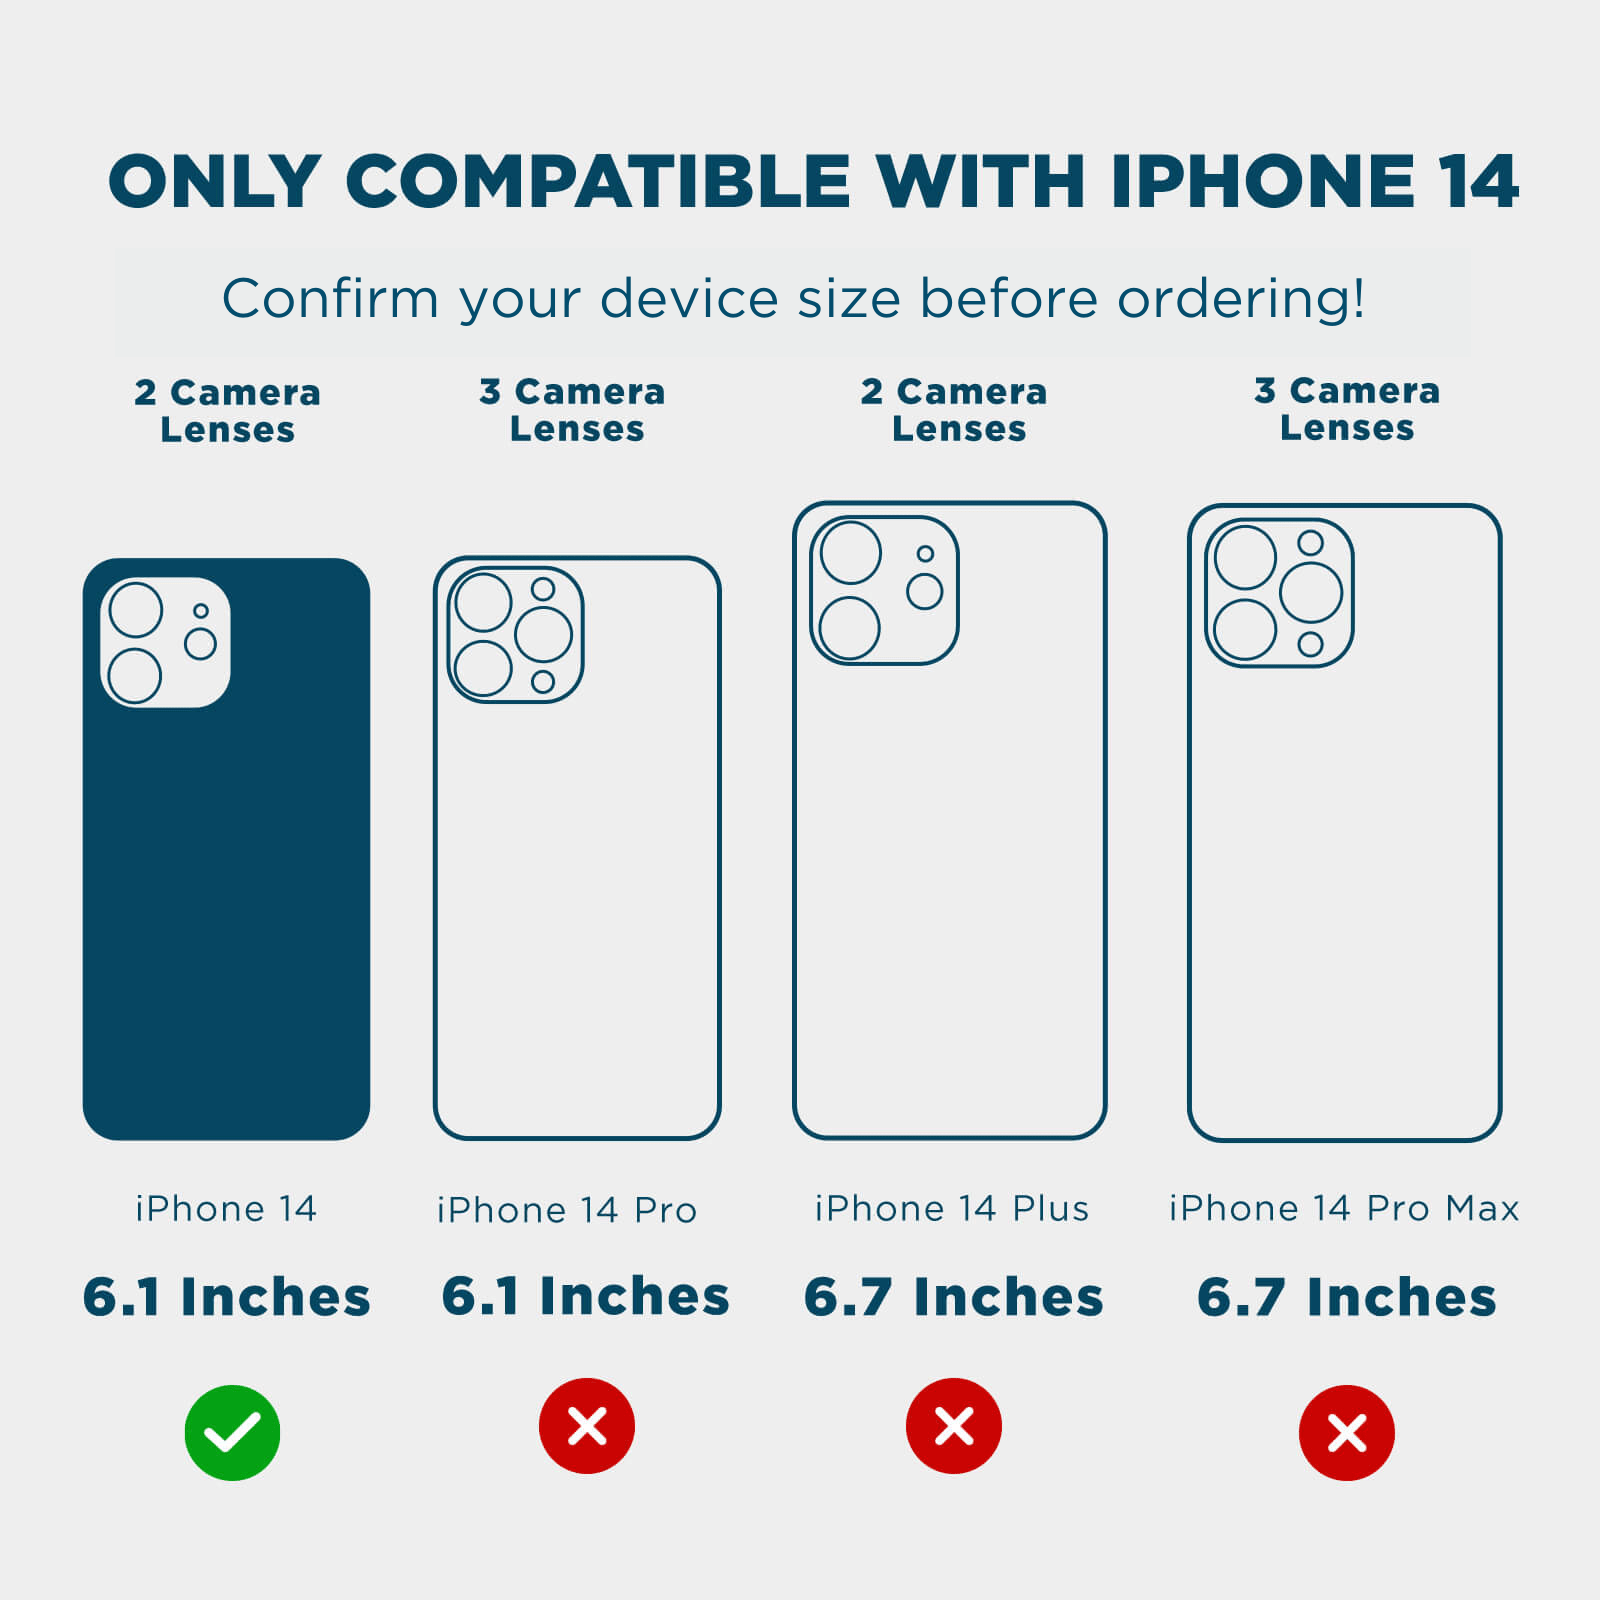 ONLY COMPATIBLE WITH IPHONE 14 CONFIRM YOUR DEVICE SIZE BEFORE ORDERING! 2 CAMERA LENSES, 3 CAMERA LENSES, 2 CAMERA LENSES, 3 CAMERA LENSES. IPHONE 14 6.1" IPHONE 14 PRO 6.1" IPHONE 14 PLUS 6.7" IPHONE 14 PRO MAX 6.7". COLOR::PEARL